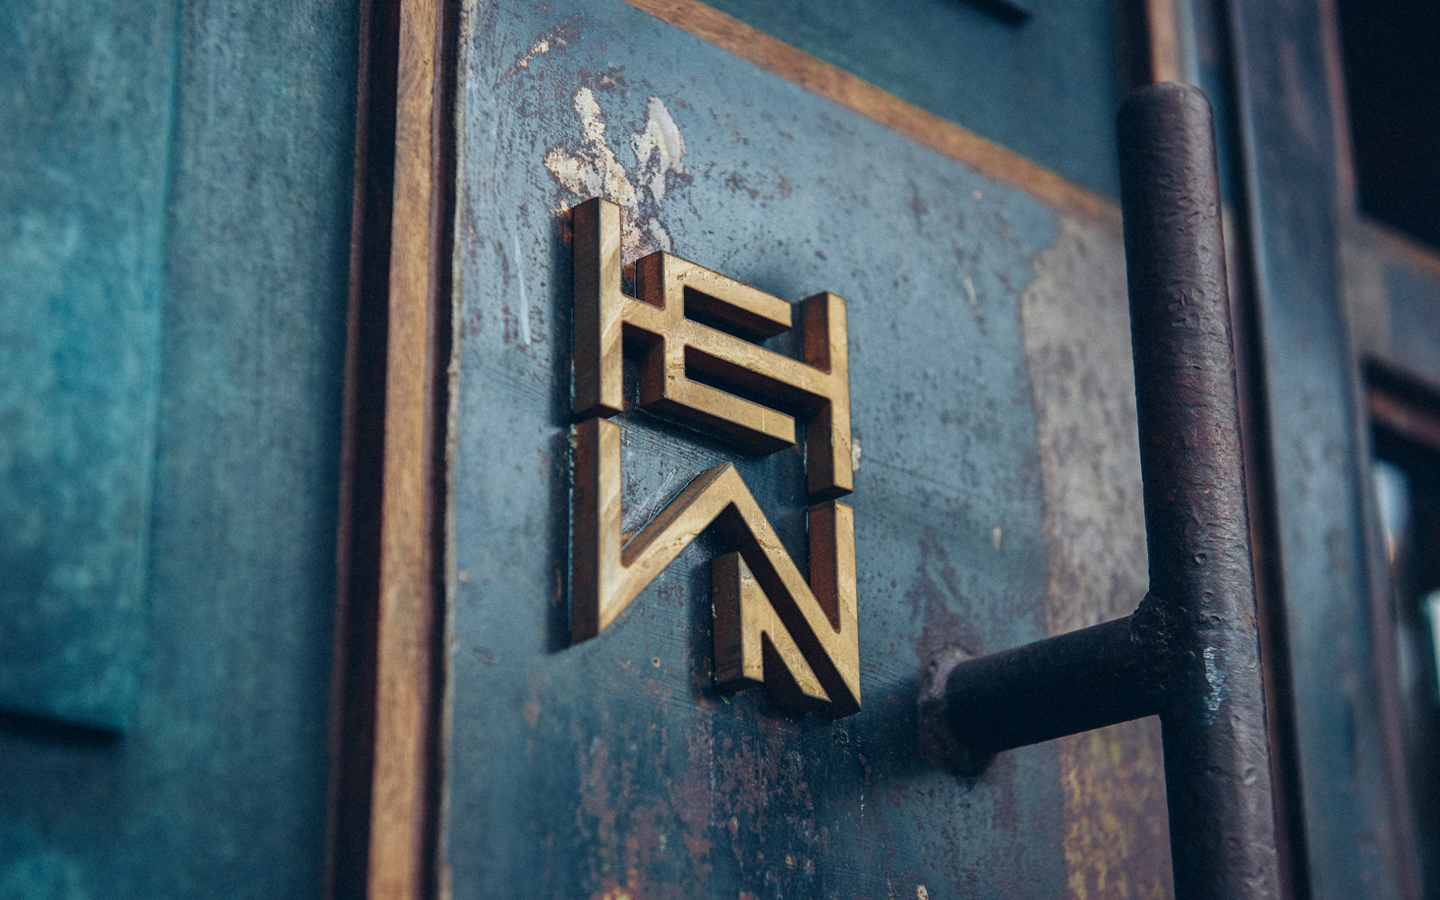 Logo and signage for woodworking shop Hewn designed by Föda, United States